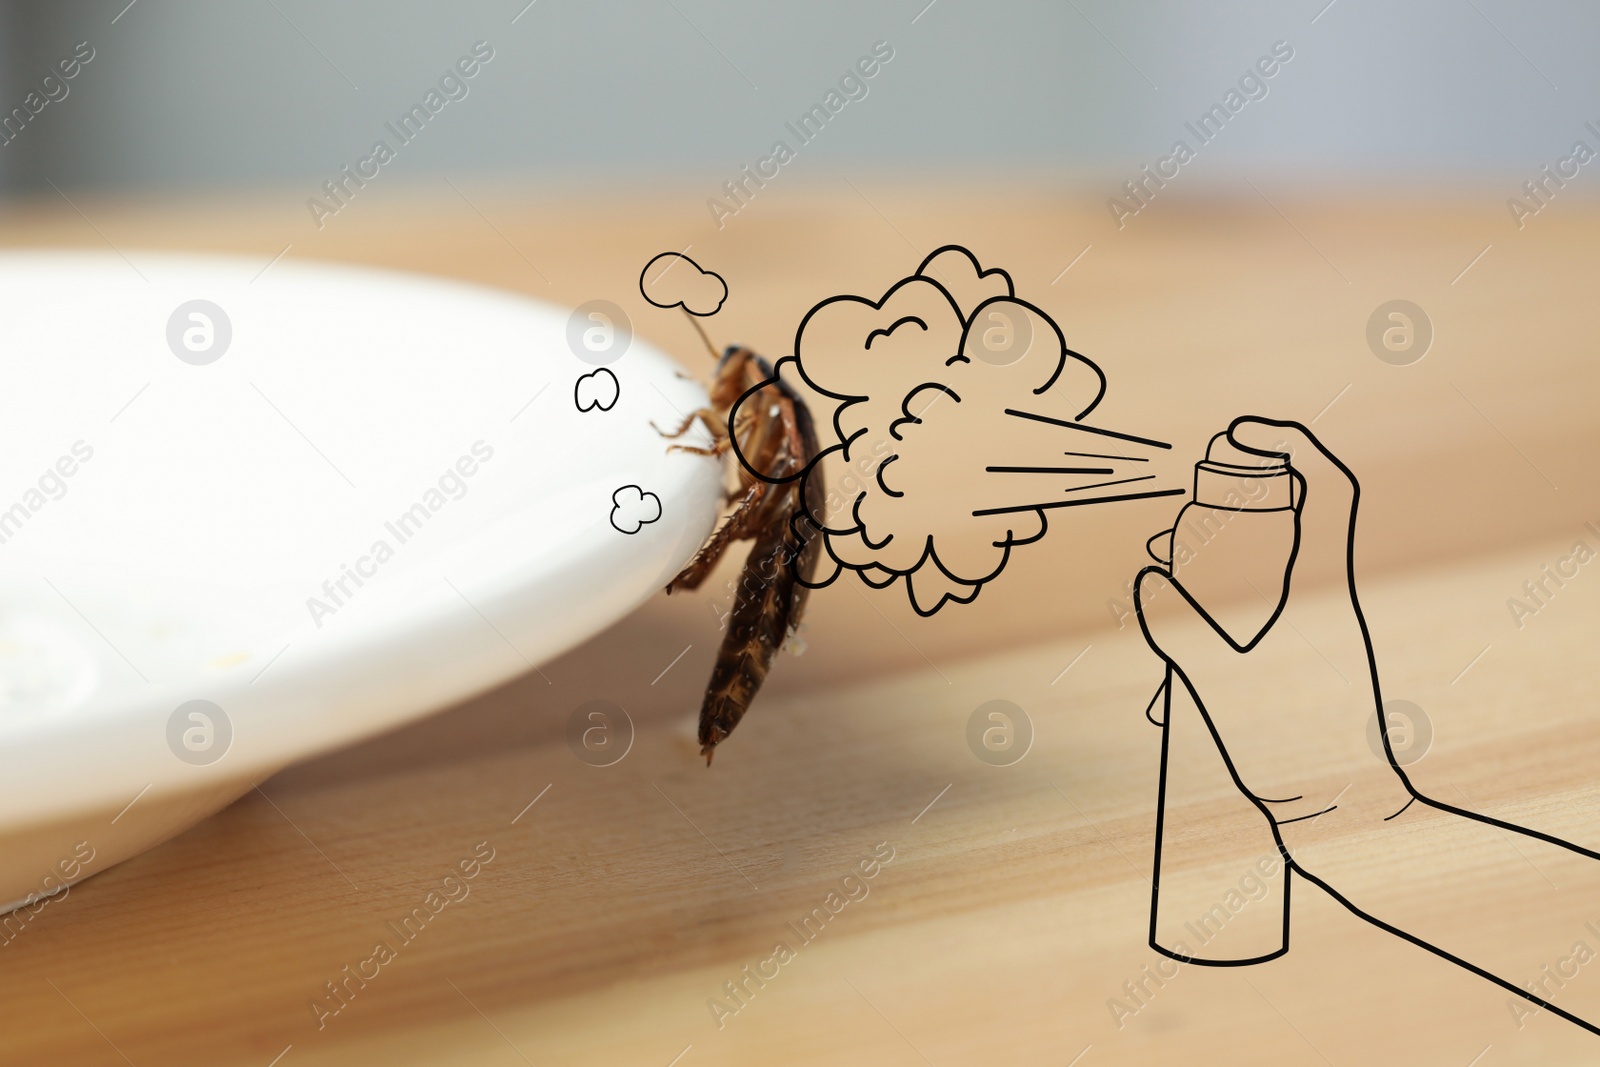 Image of Pest control. Using household insecticide to kill cockroach at home, closeup. Illustration